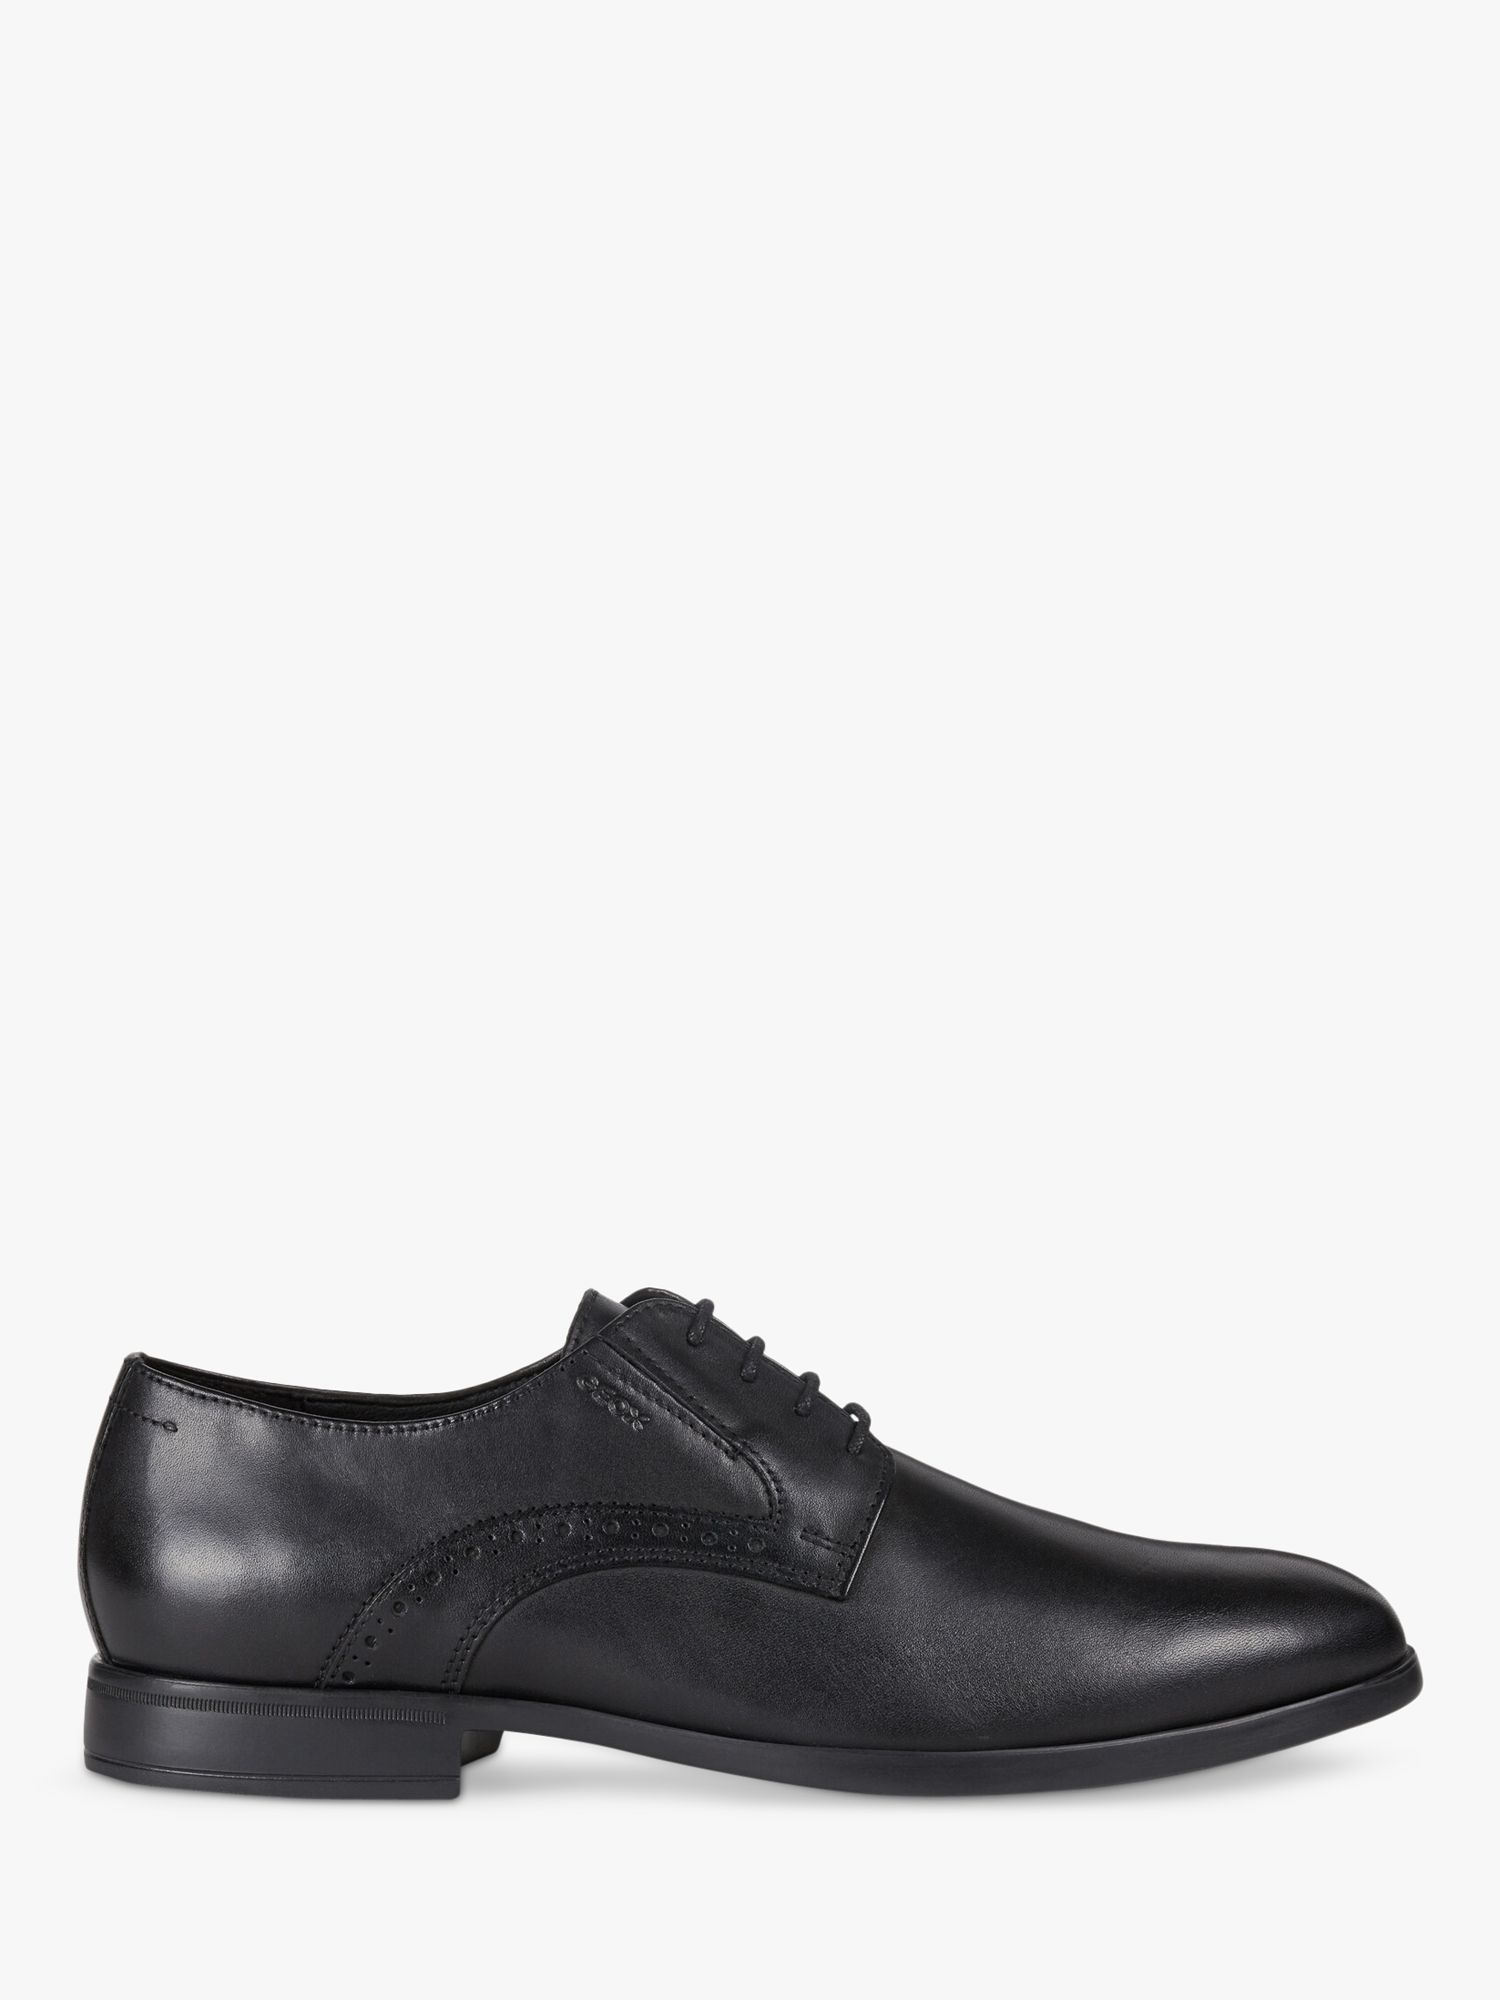 Geox Domenico Leather Formal Shoes at John Lewis & Partners